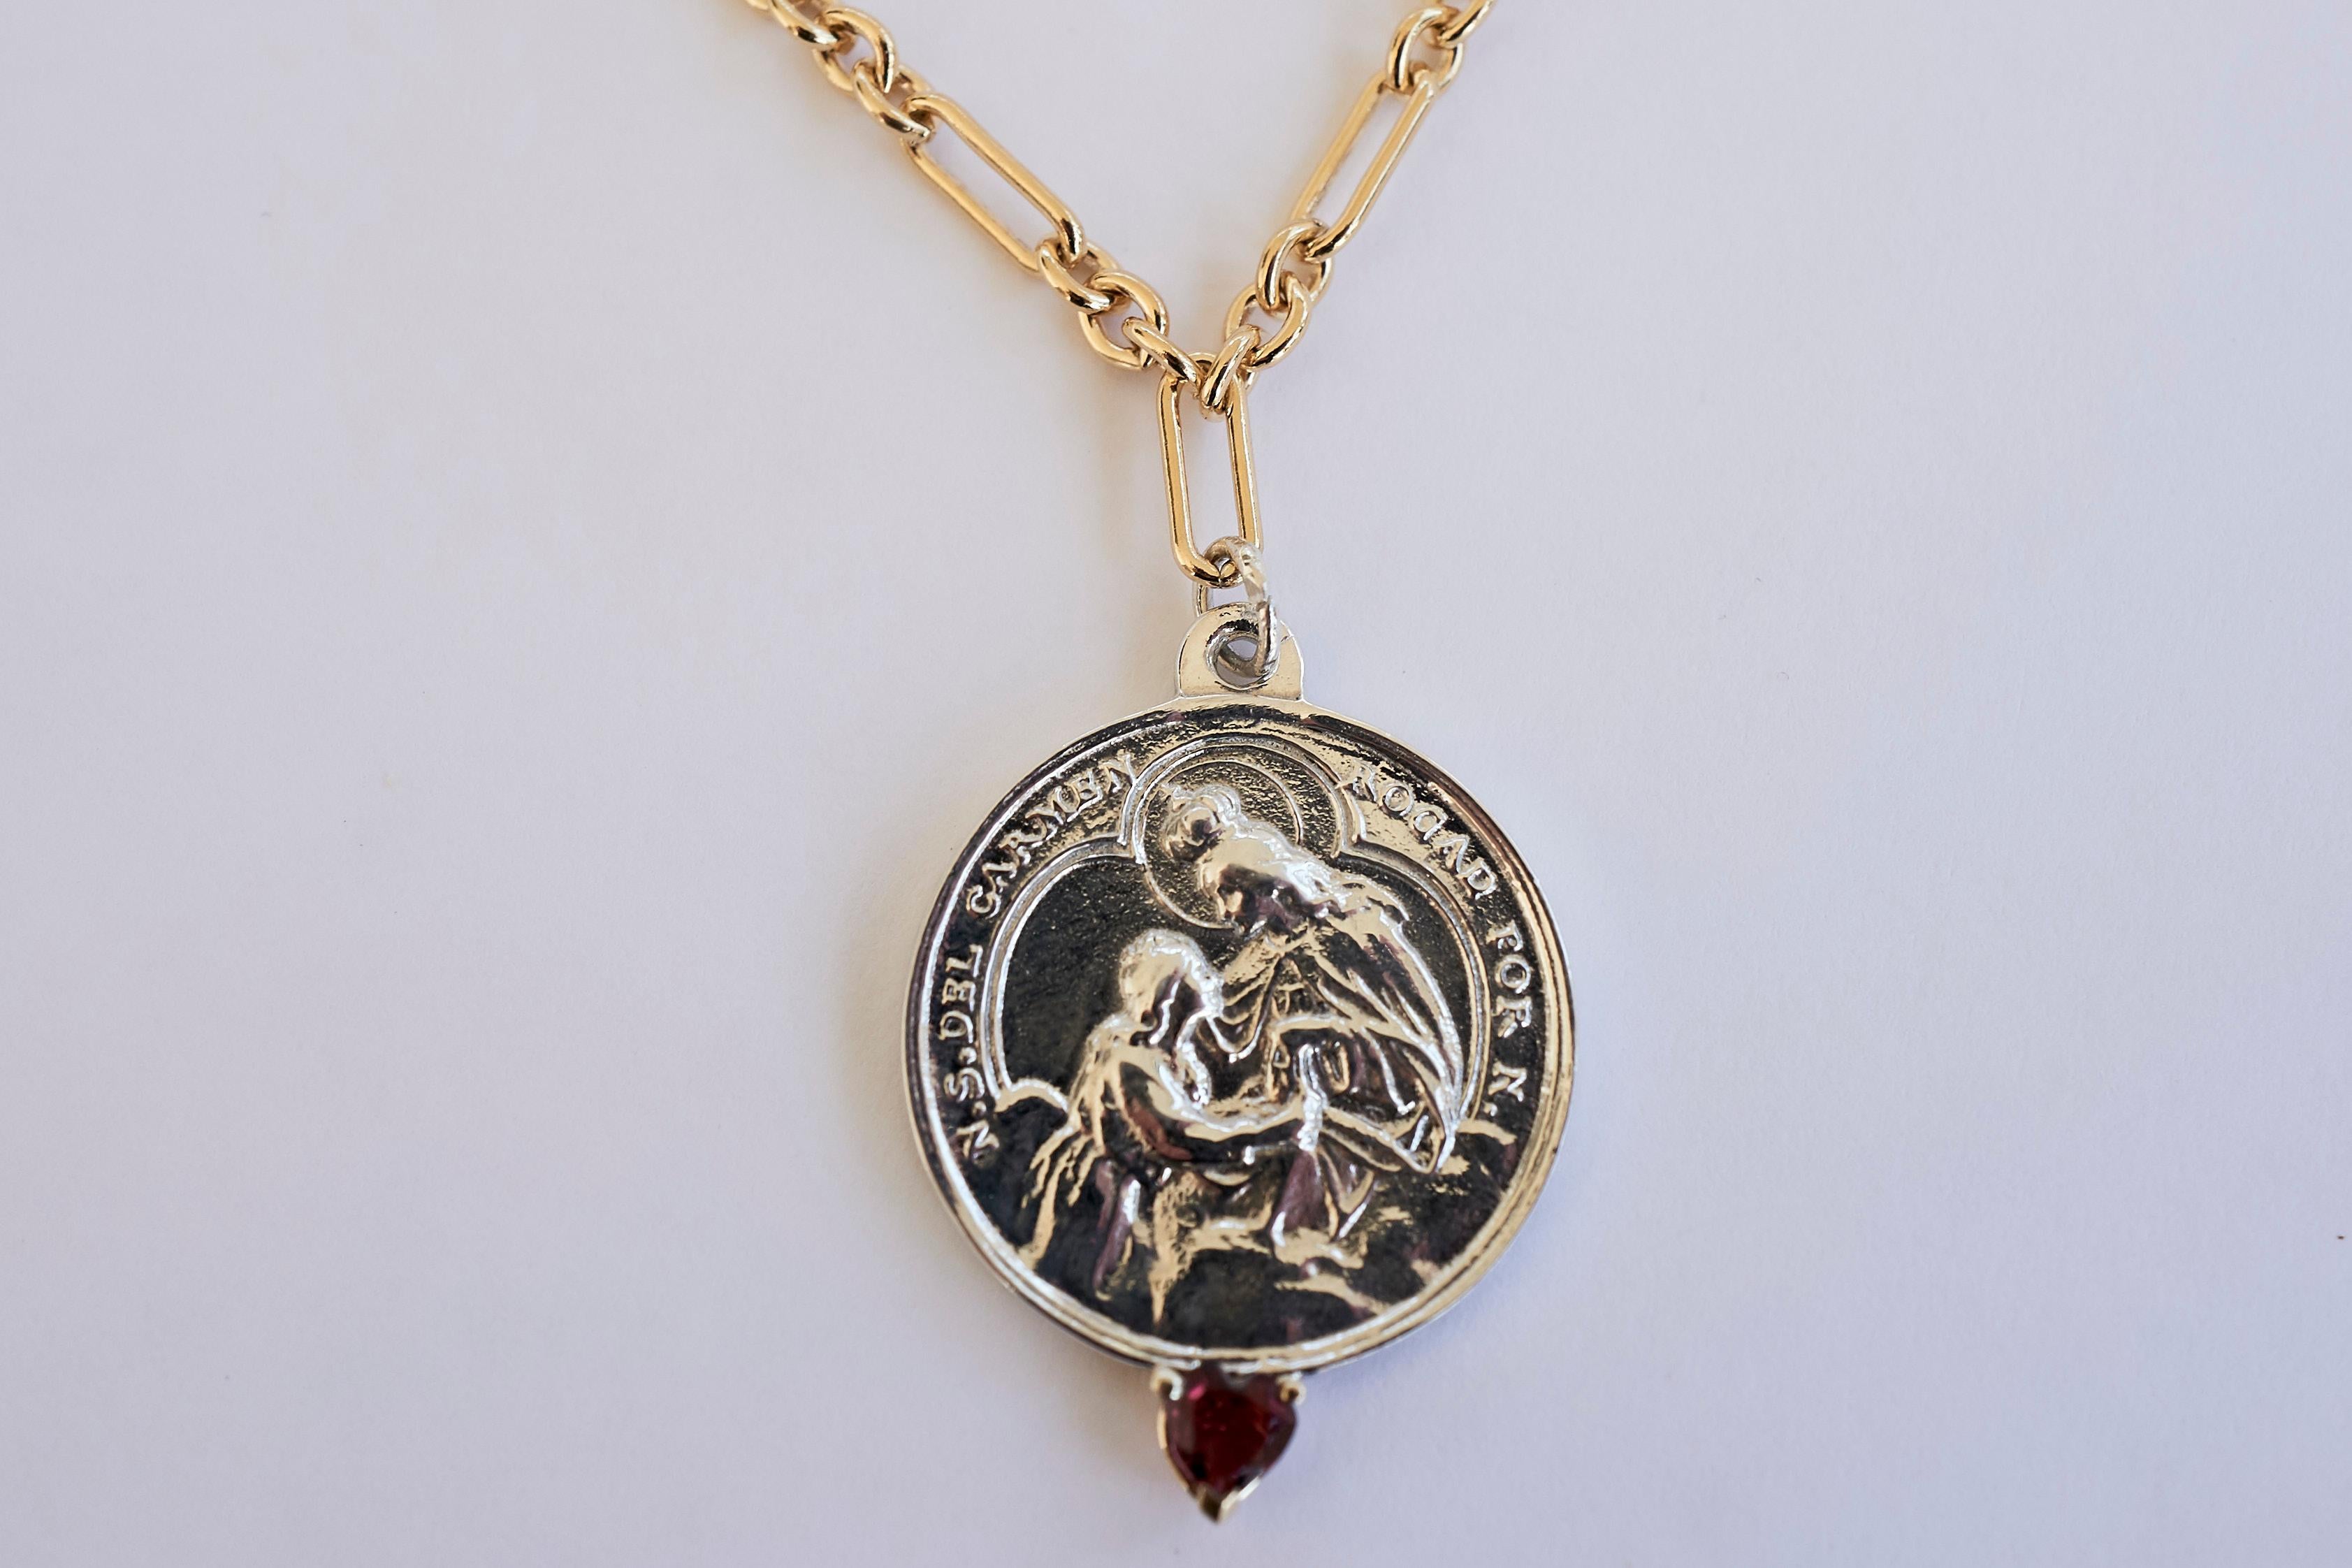 Ruby Heart Virgin Mary Medal Coin Silver and Gold Filled Necklace Chain J Dauphin

Exclusive piece with a Round Virgin Mary Medal in Silver with a Ruby Heart Cut set in a Gold prong and with a gold filled Chain. Necklace is 24